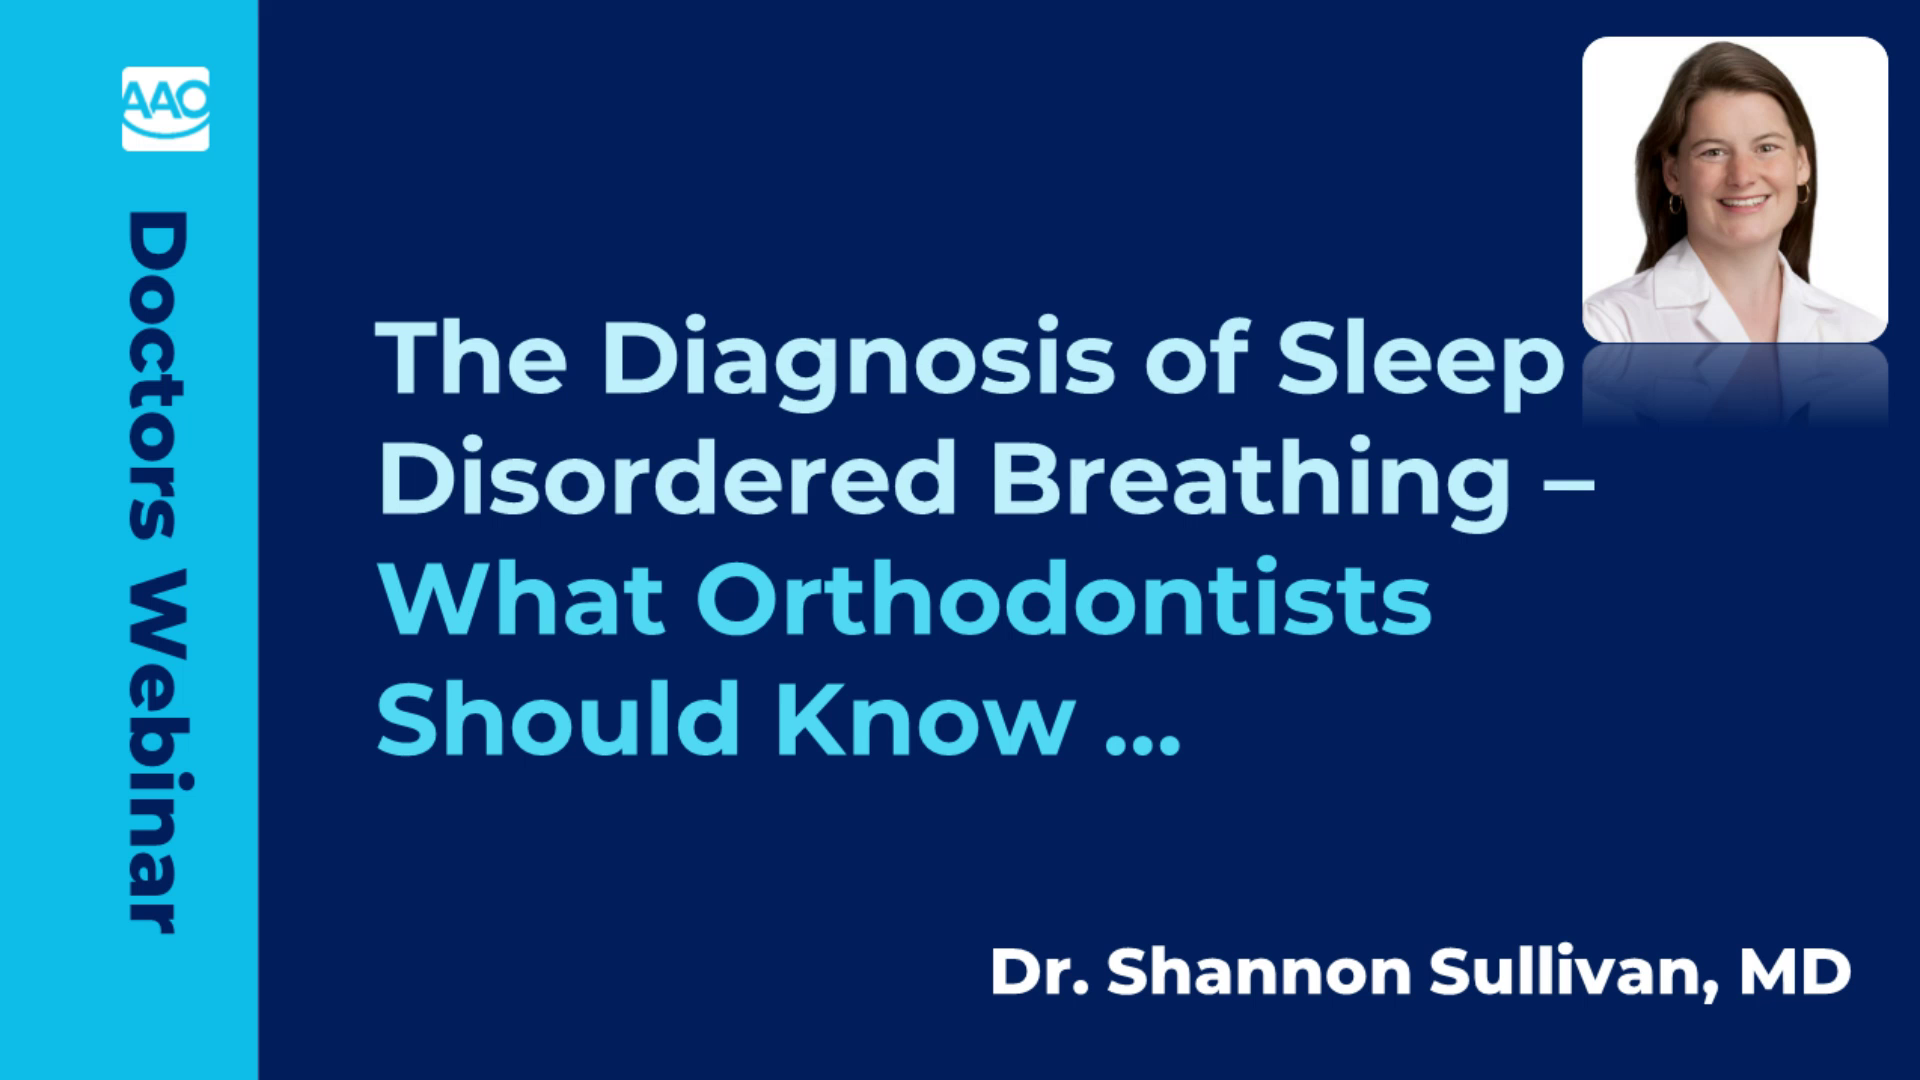 The Diagnosis of Sleep Disordered Breathing -- What Orthodontists Should Know